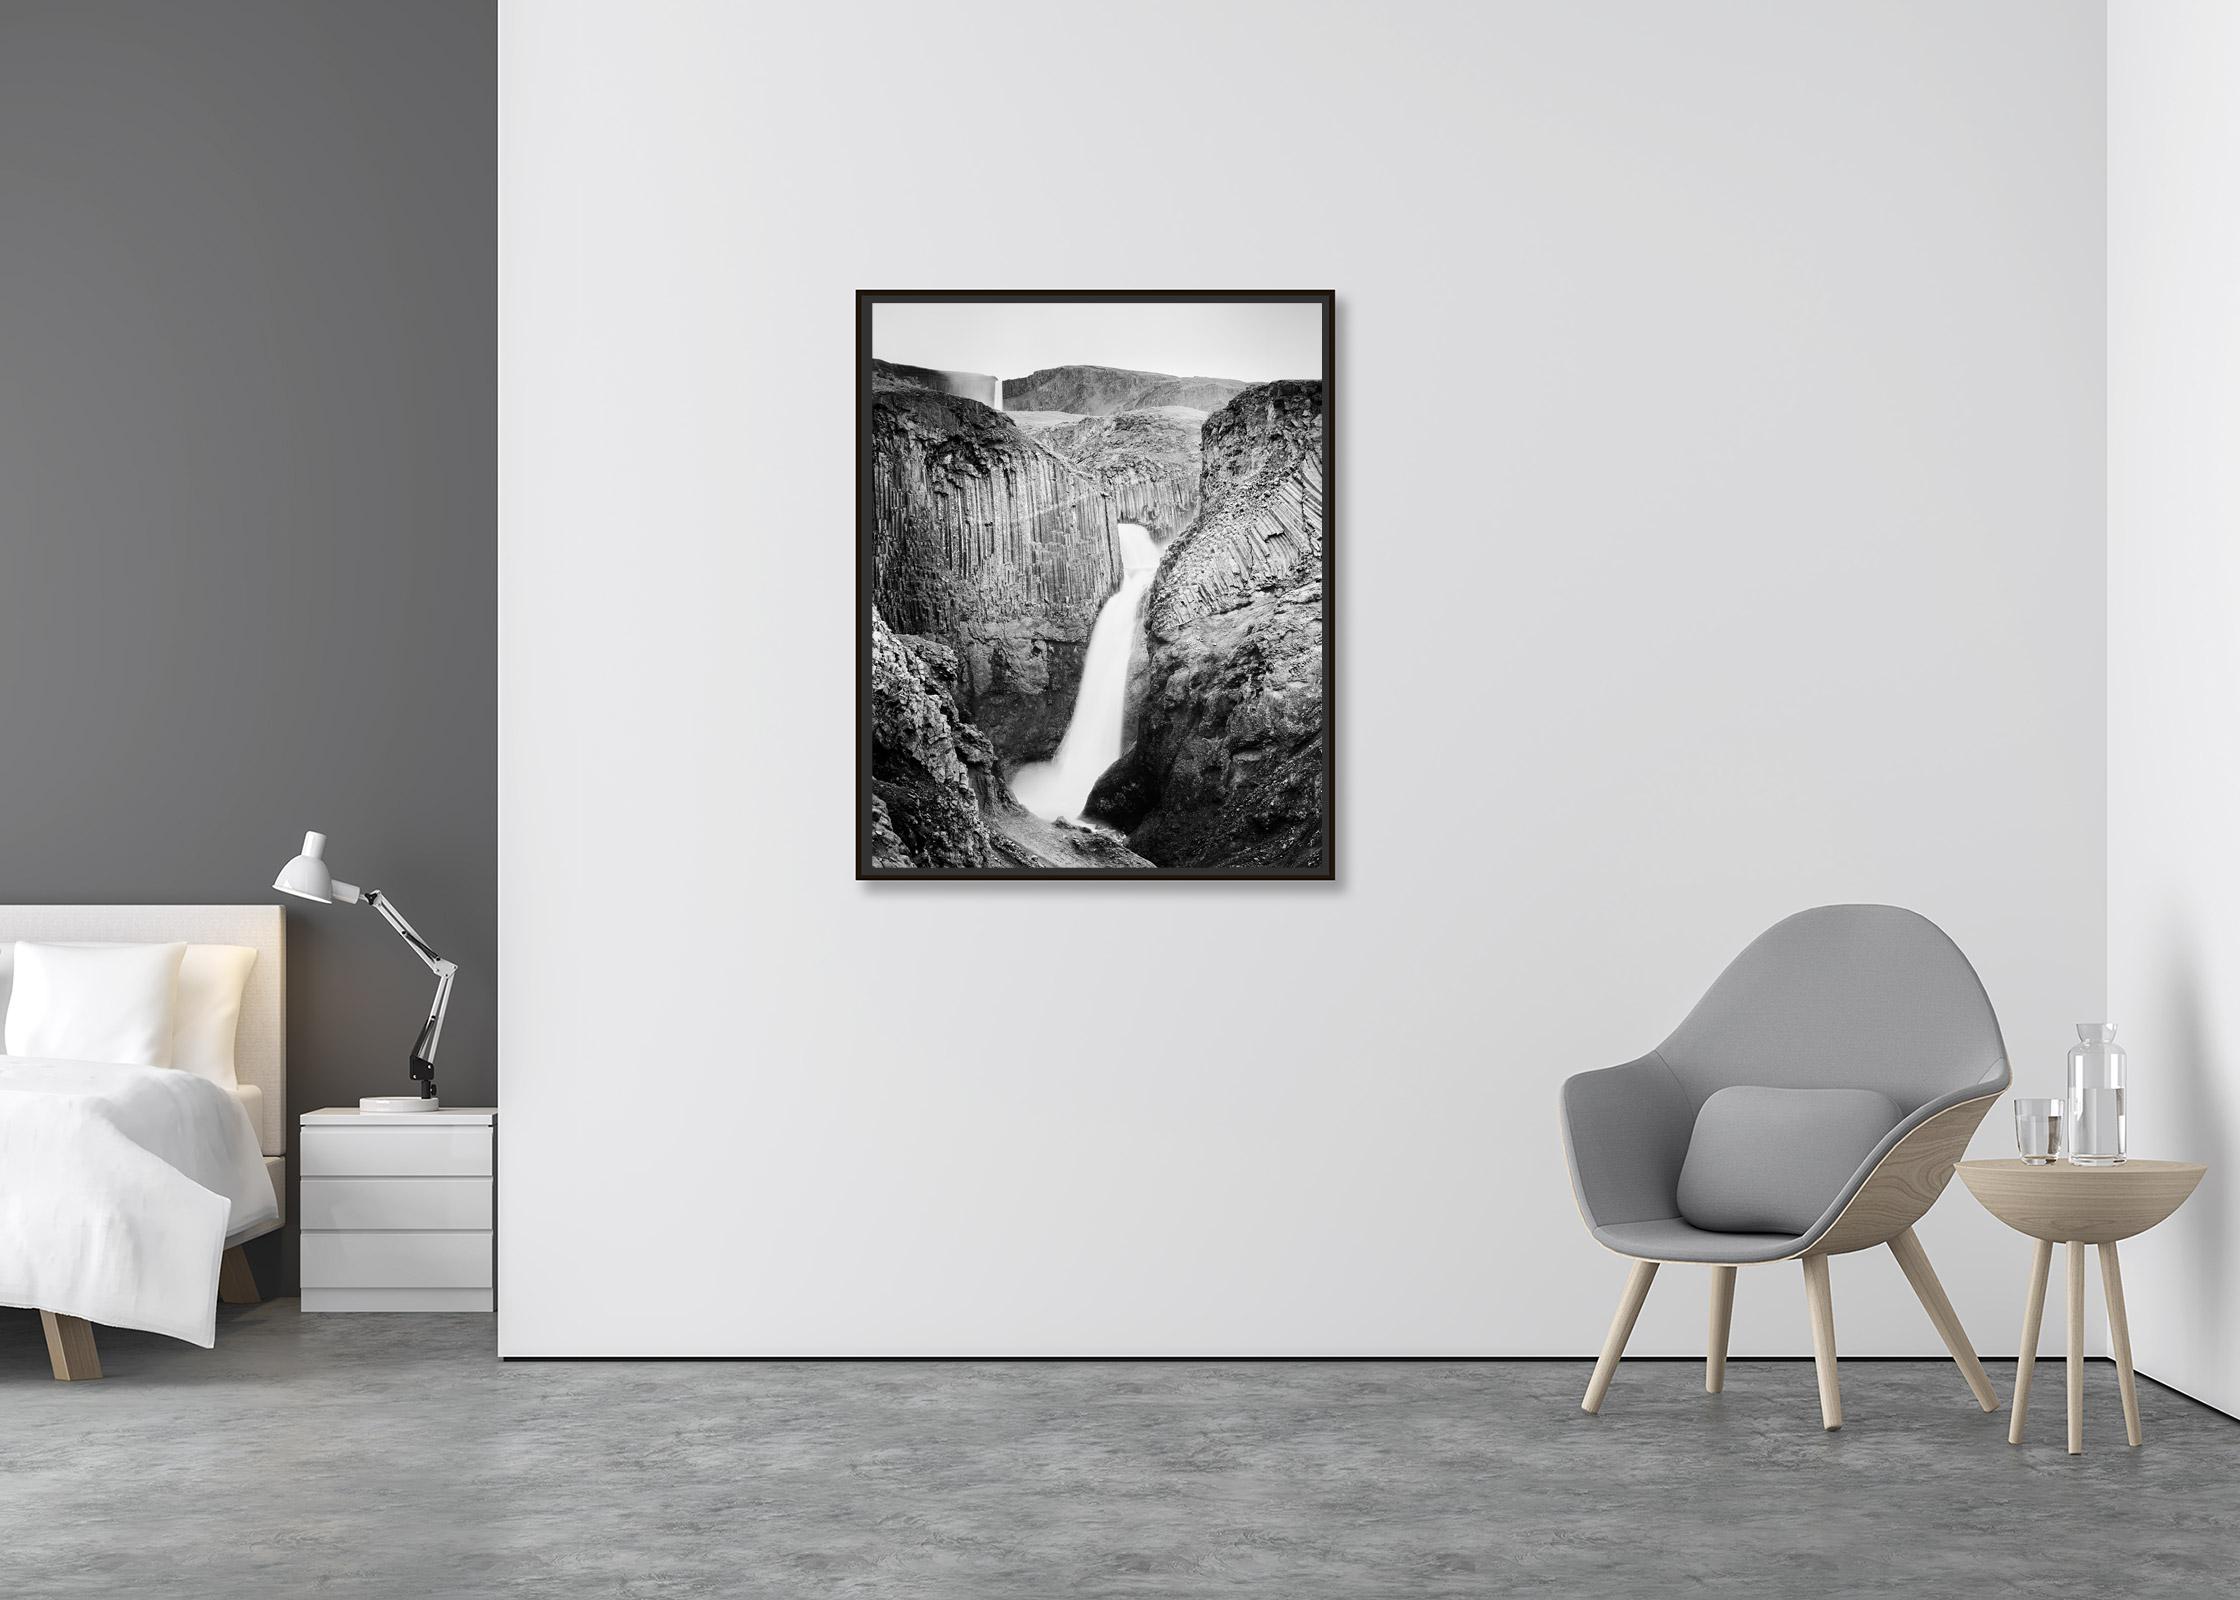 Hengifoss, Waterfall, Iceland, black and white fine art photography, landscape - Contemporary Photograph by Gerald Berghammer, Ina Forstinger